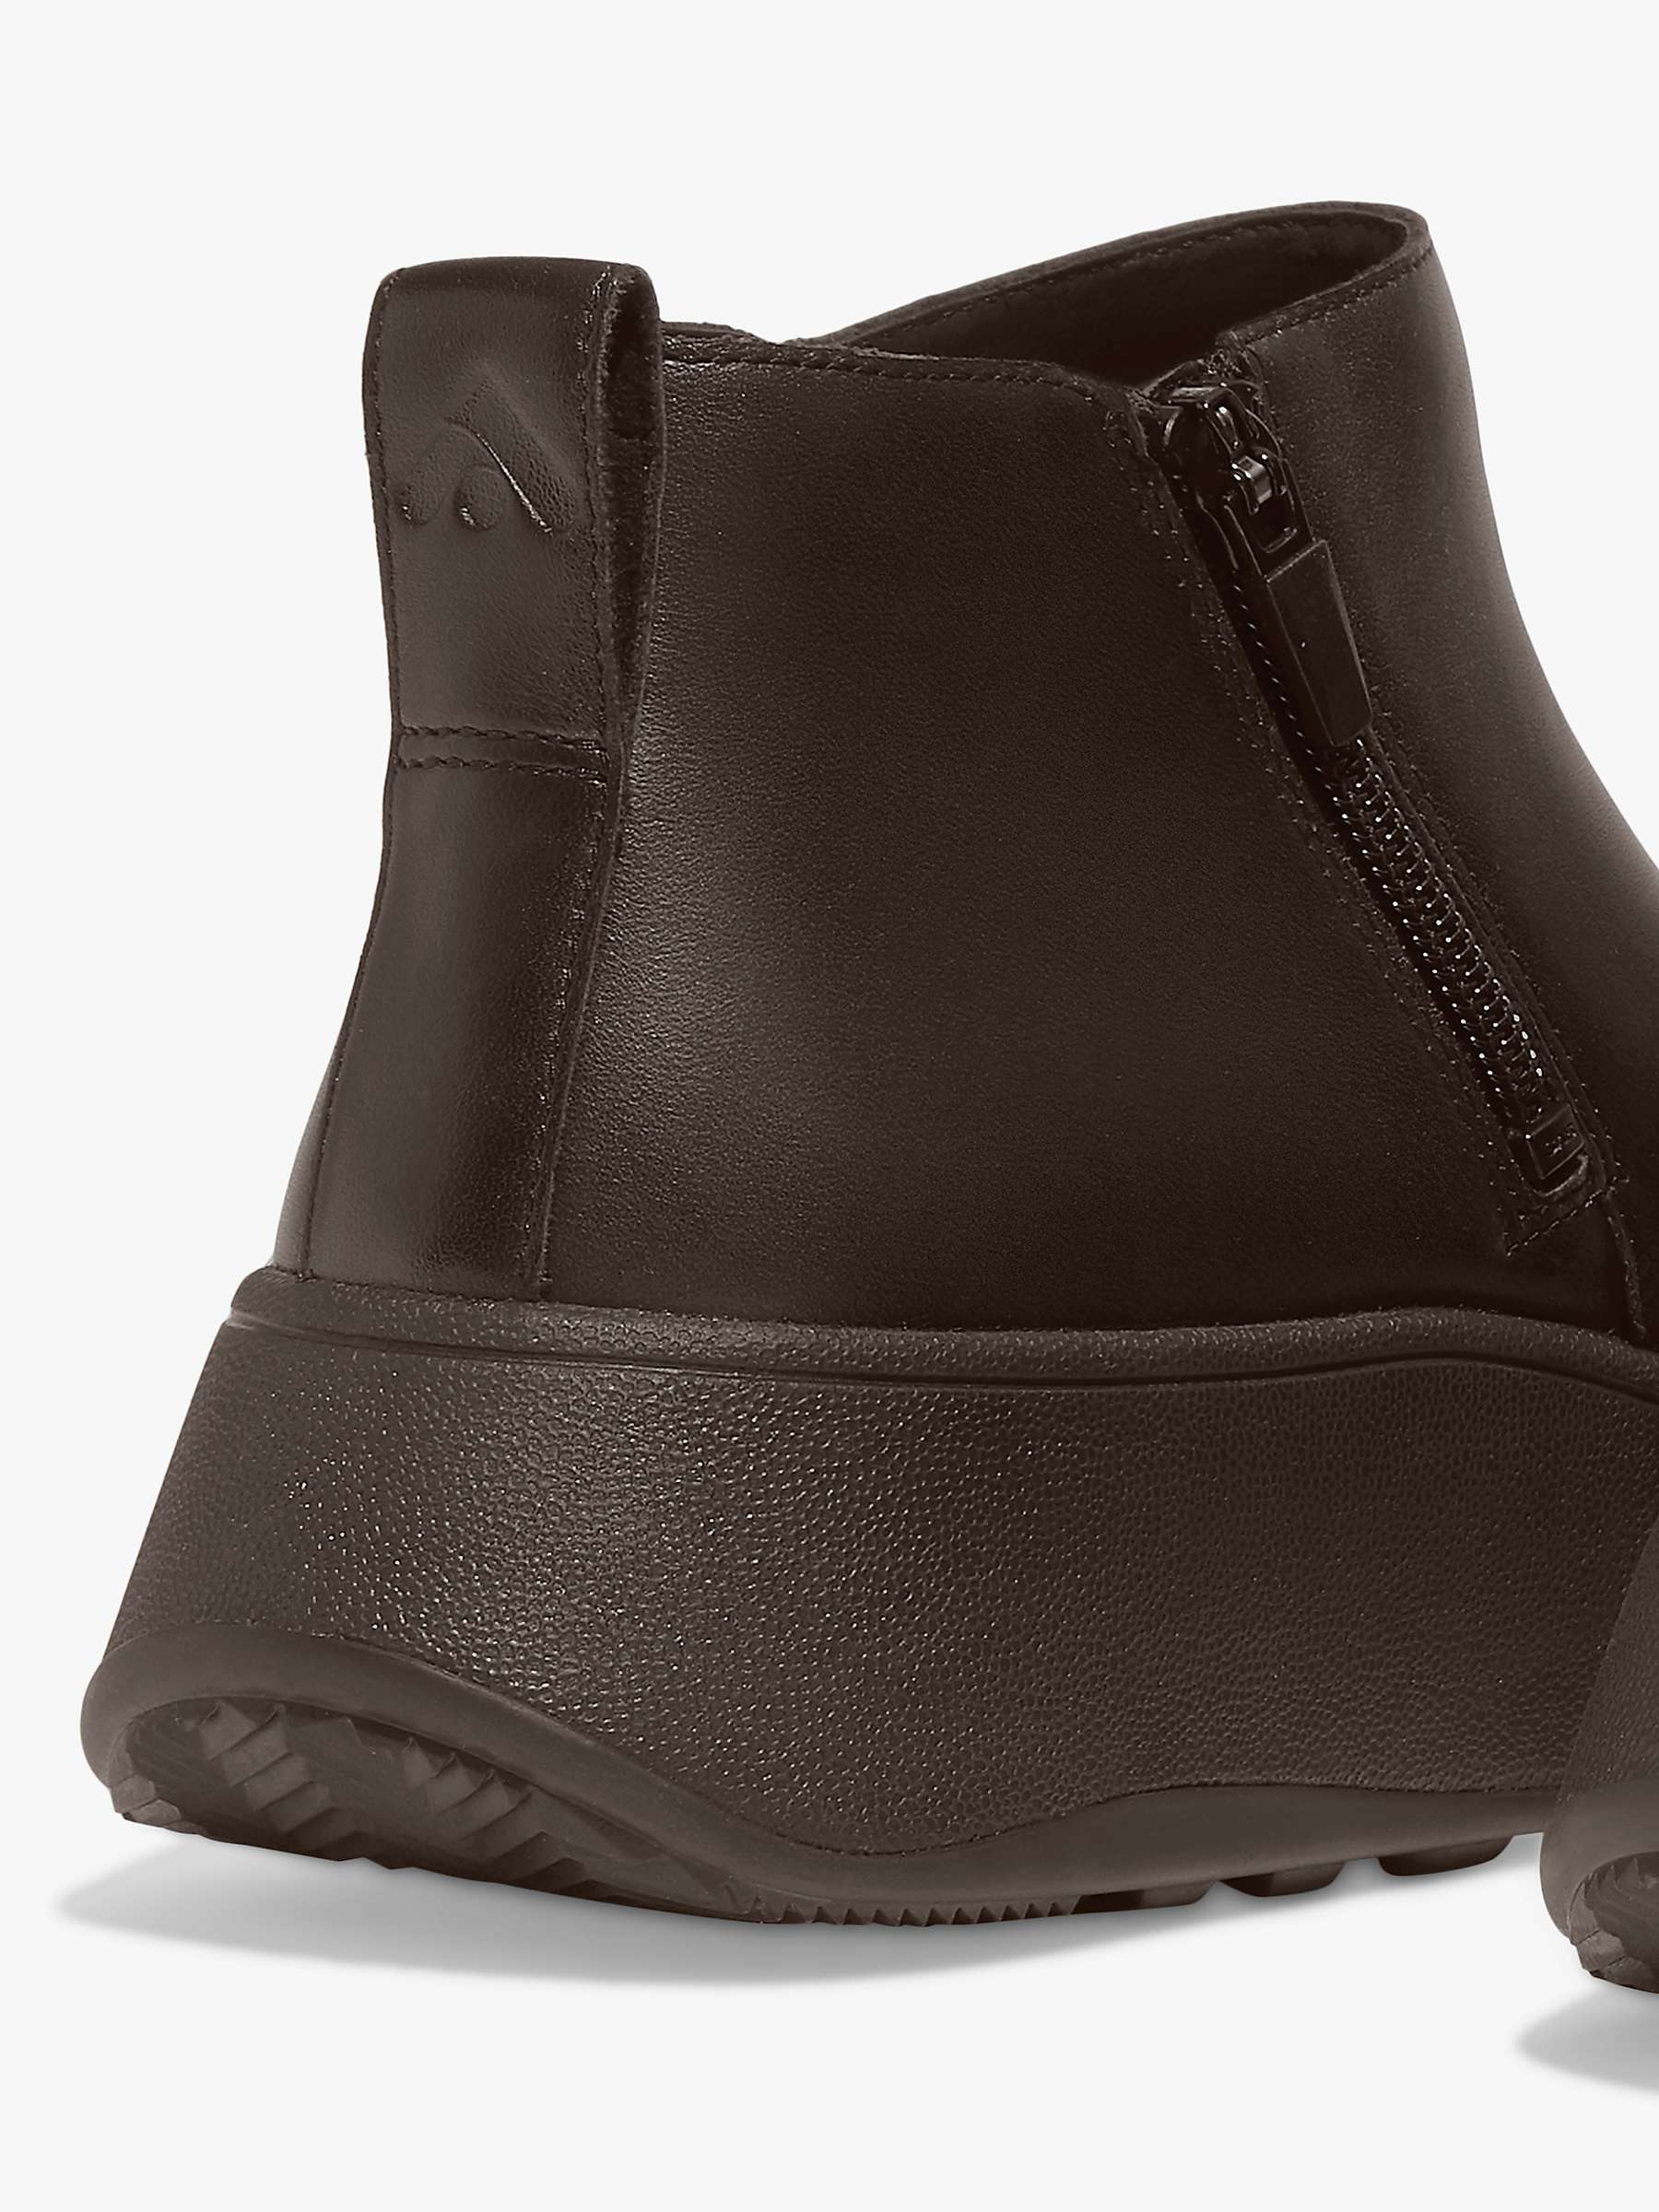 FitFlop F-Mode Leather Ankle Boots, Chocolate Brown at John Lewis ...